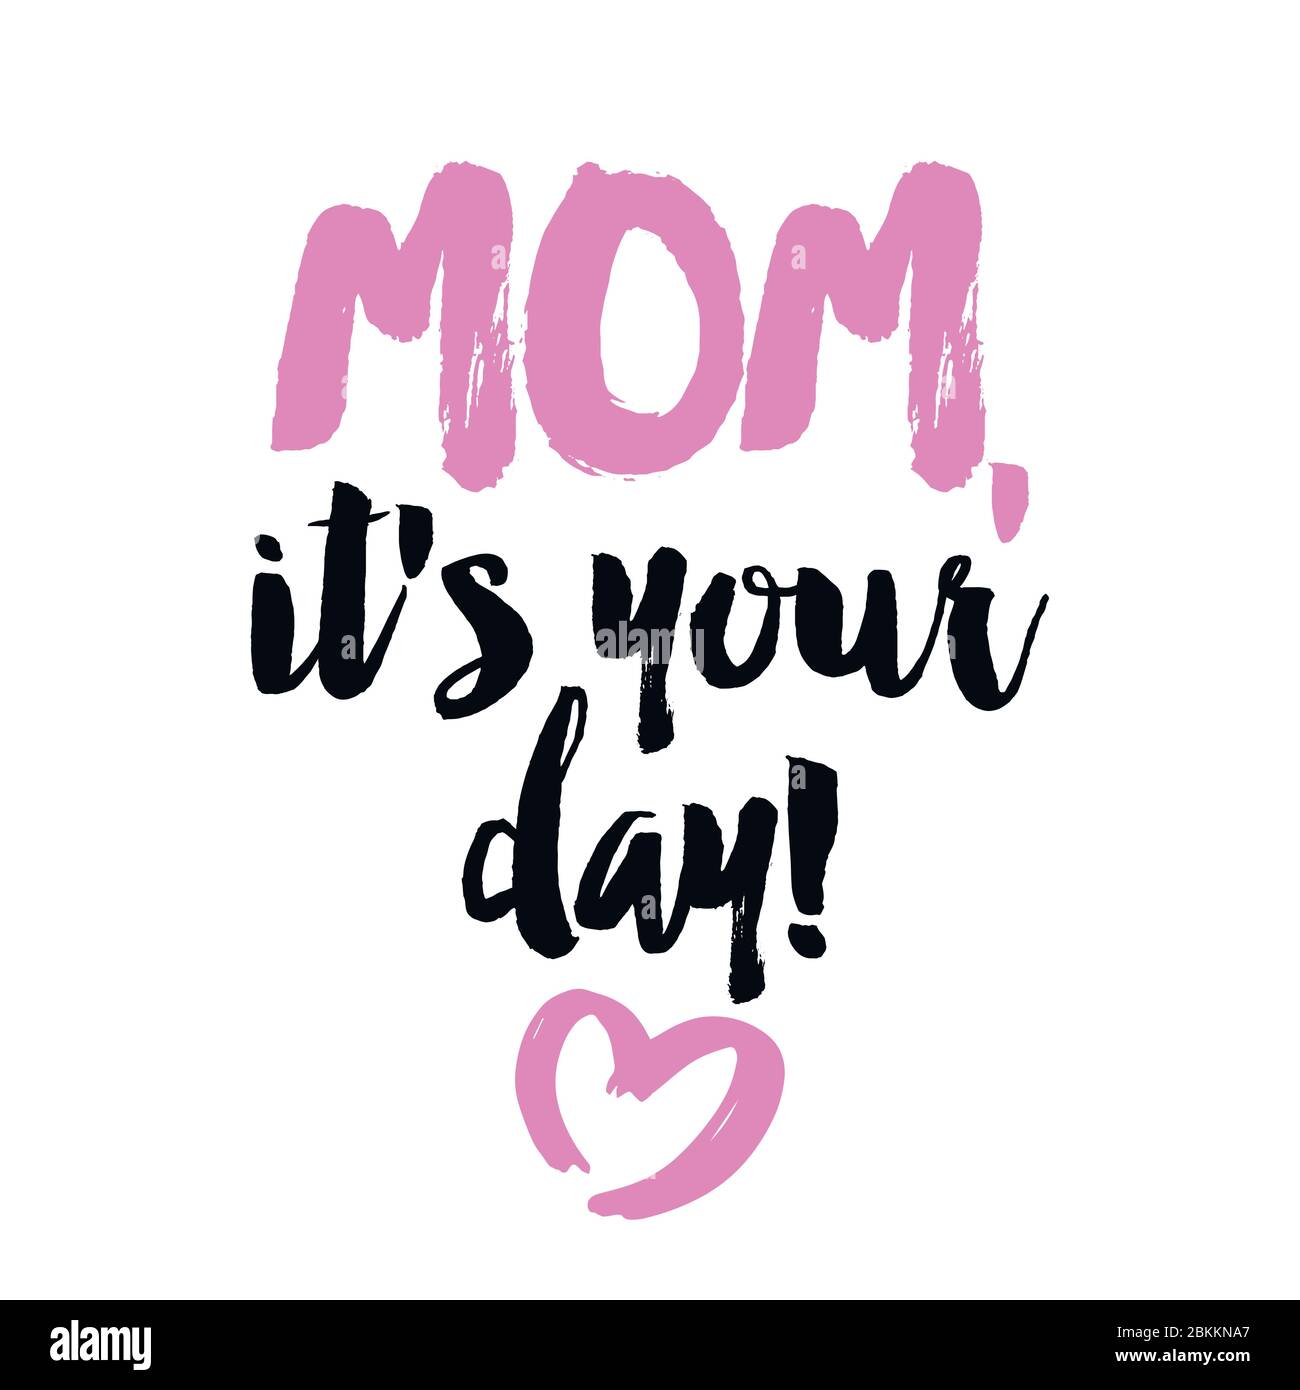 https://c8.alamy.com/comp/2BKKNA7/mom-its-your-day-vector-greeting-card-for-happy-mothers-day-handmade-calligraphy-vector-illustration-mothers-day-card-good-for-scrap-booking-2BKKNA7.jpg